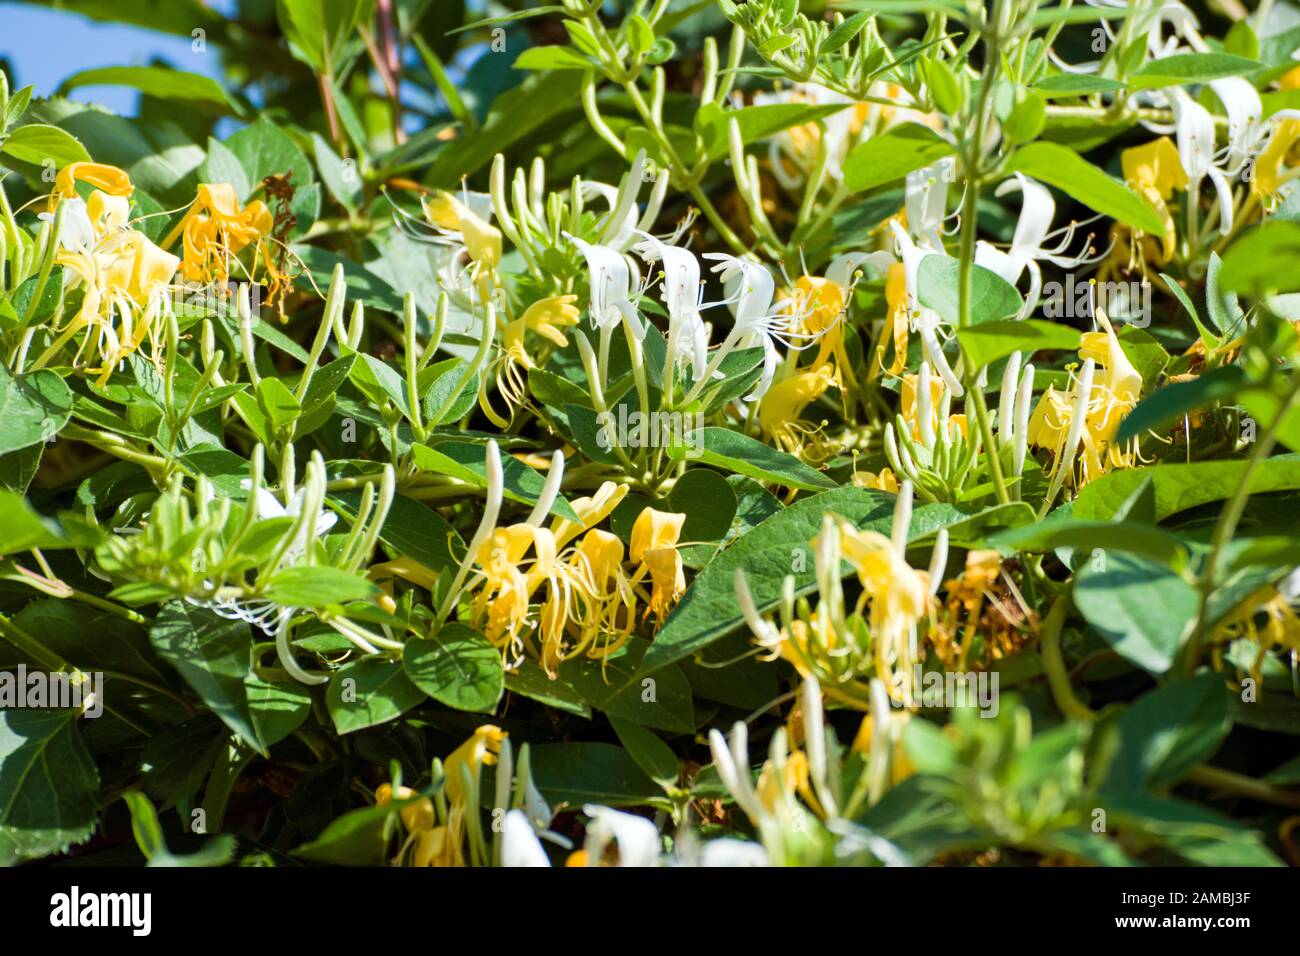 Lonicera periclymenum, known by common names as honeysuckle, common honeysuckle, European honeysuckle, or woodbine: beautiful yellow and white flowers. Stock Photo